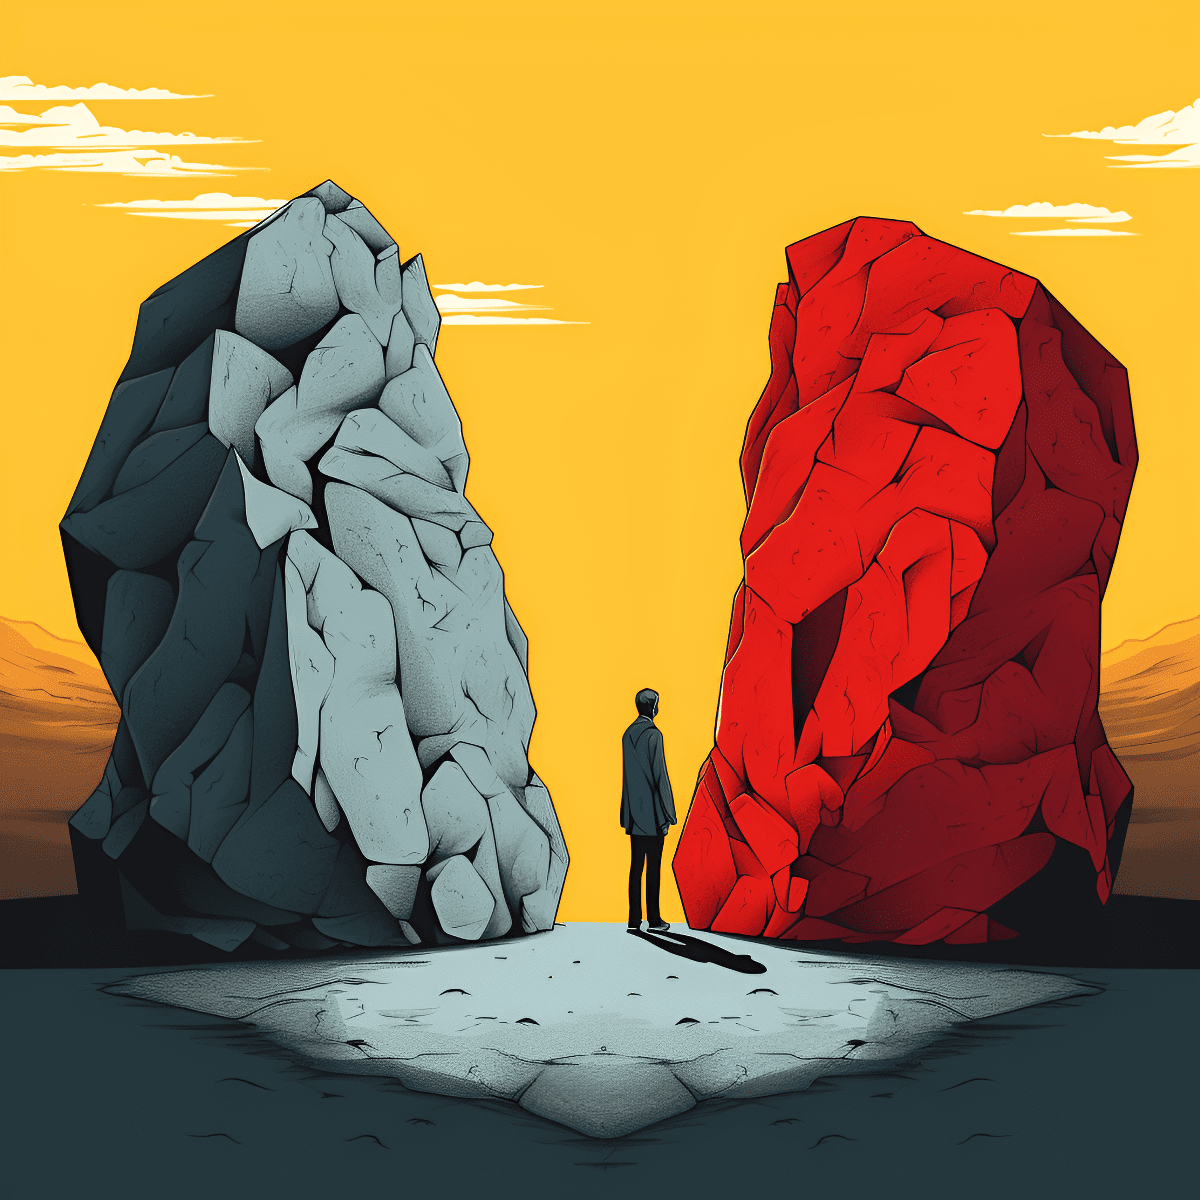 person between a rock and a hard place